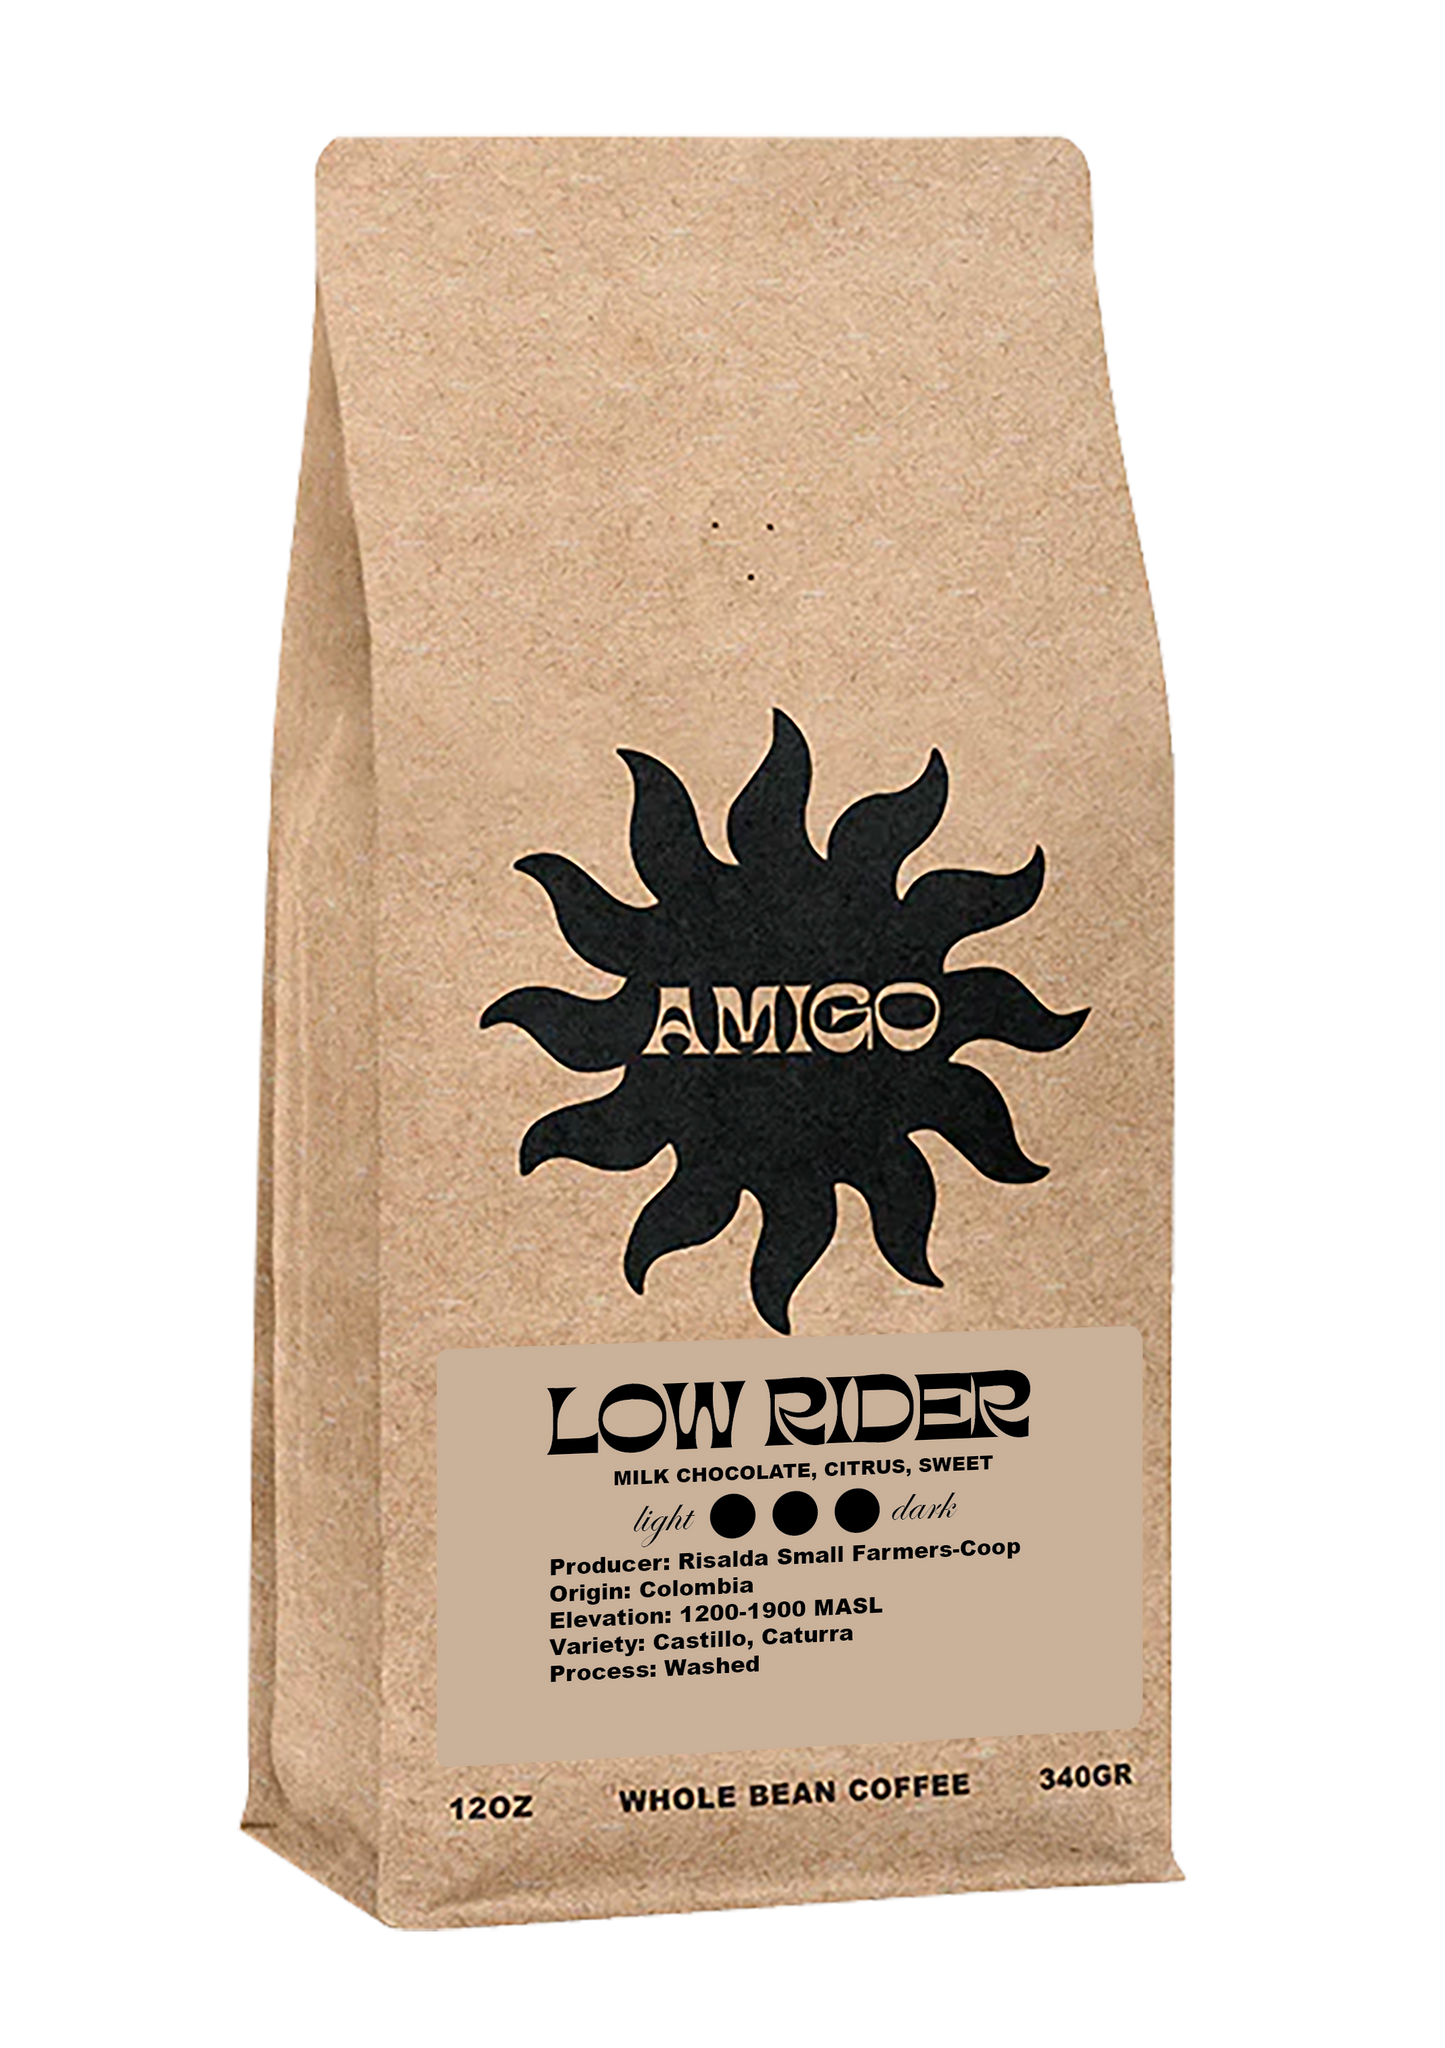 A bag of Low Rider coffee beans